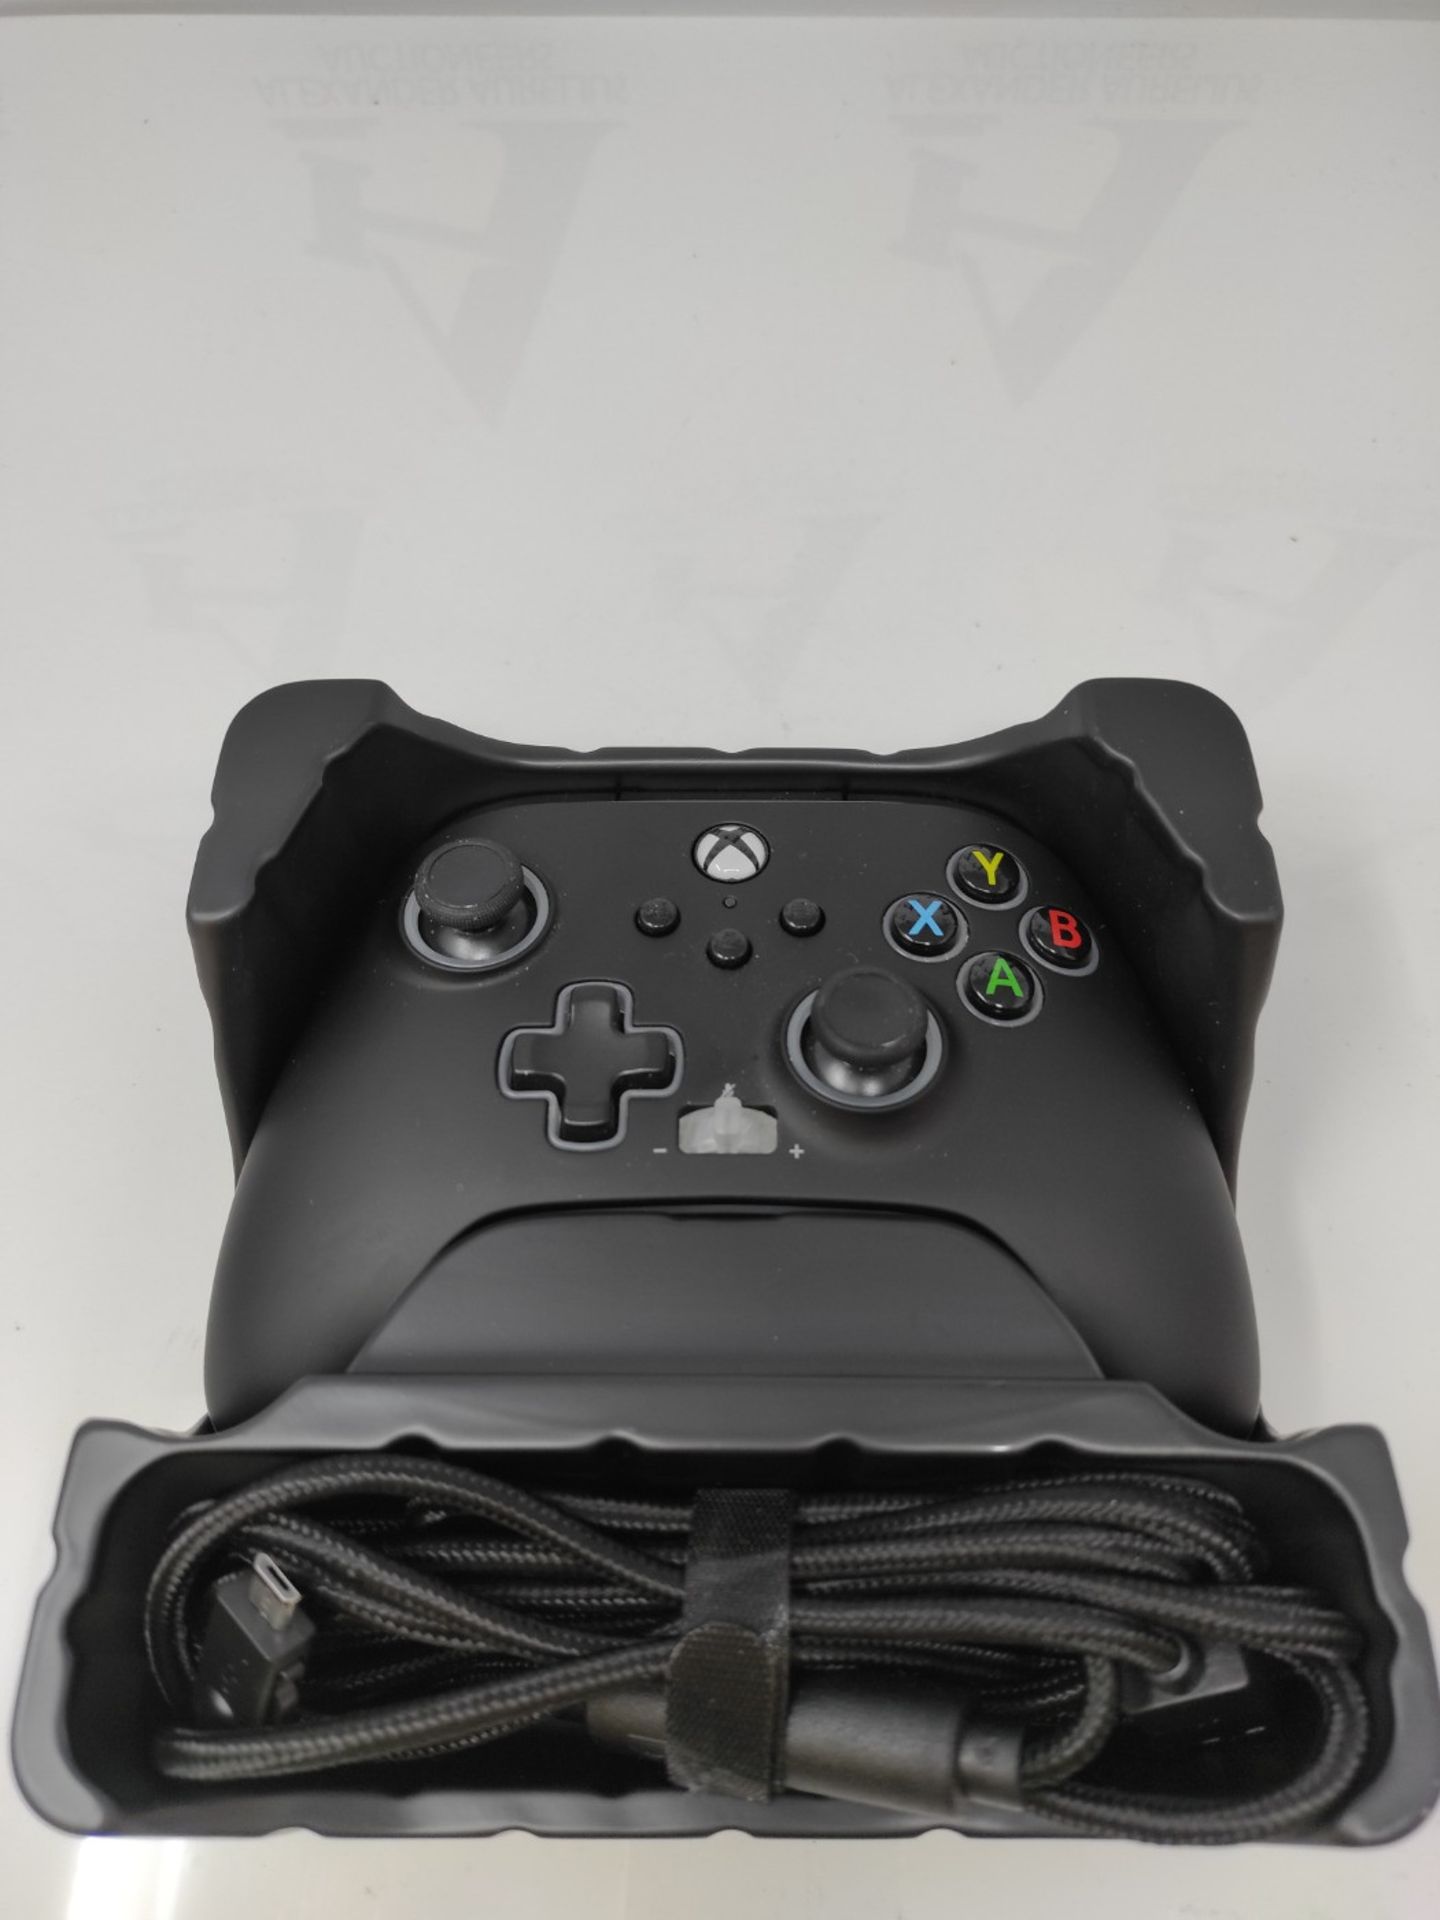 PowerA Wired Advanced Spectra Infinity Controller for Xbox Series X|S - Image 3 of 3